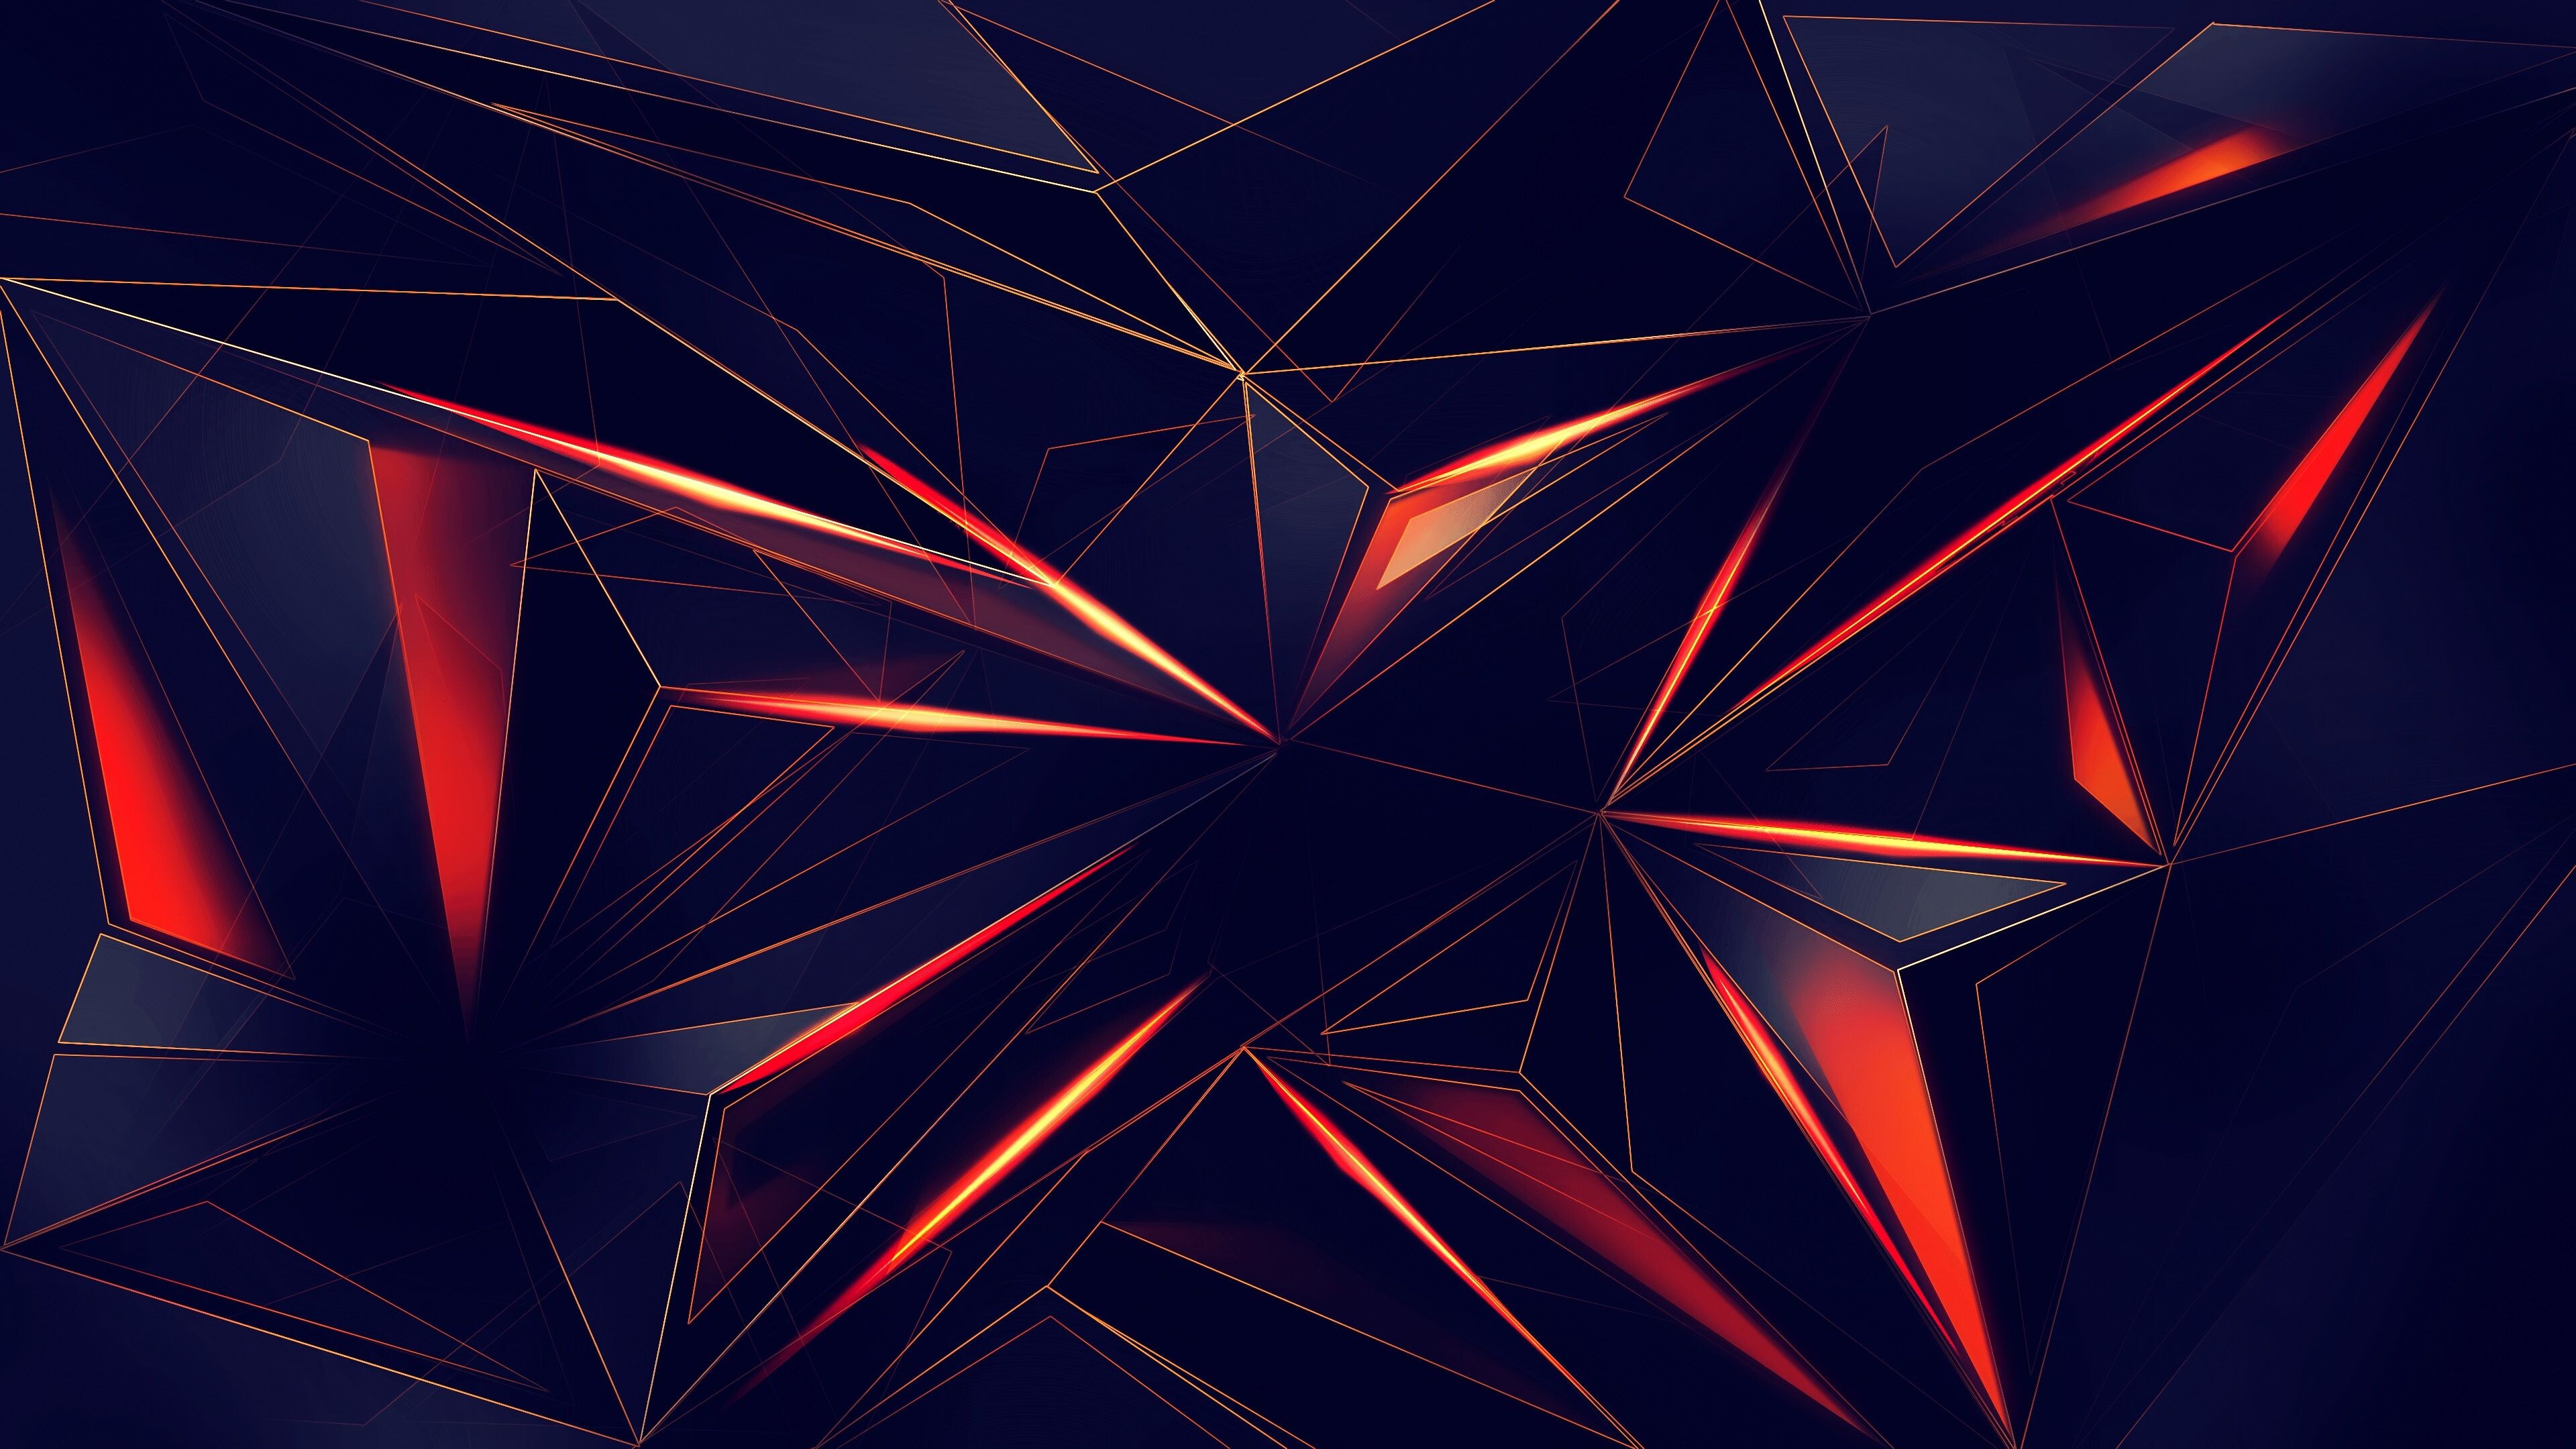 Geometry: Abstract pattern, Intersecting line segments, Angles. 3840x2160 4K Wallpaper.